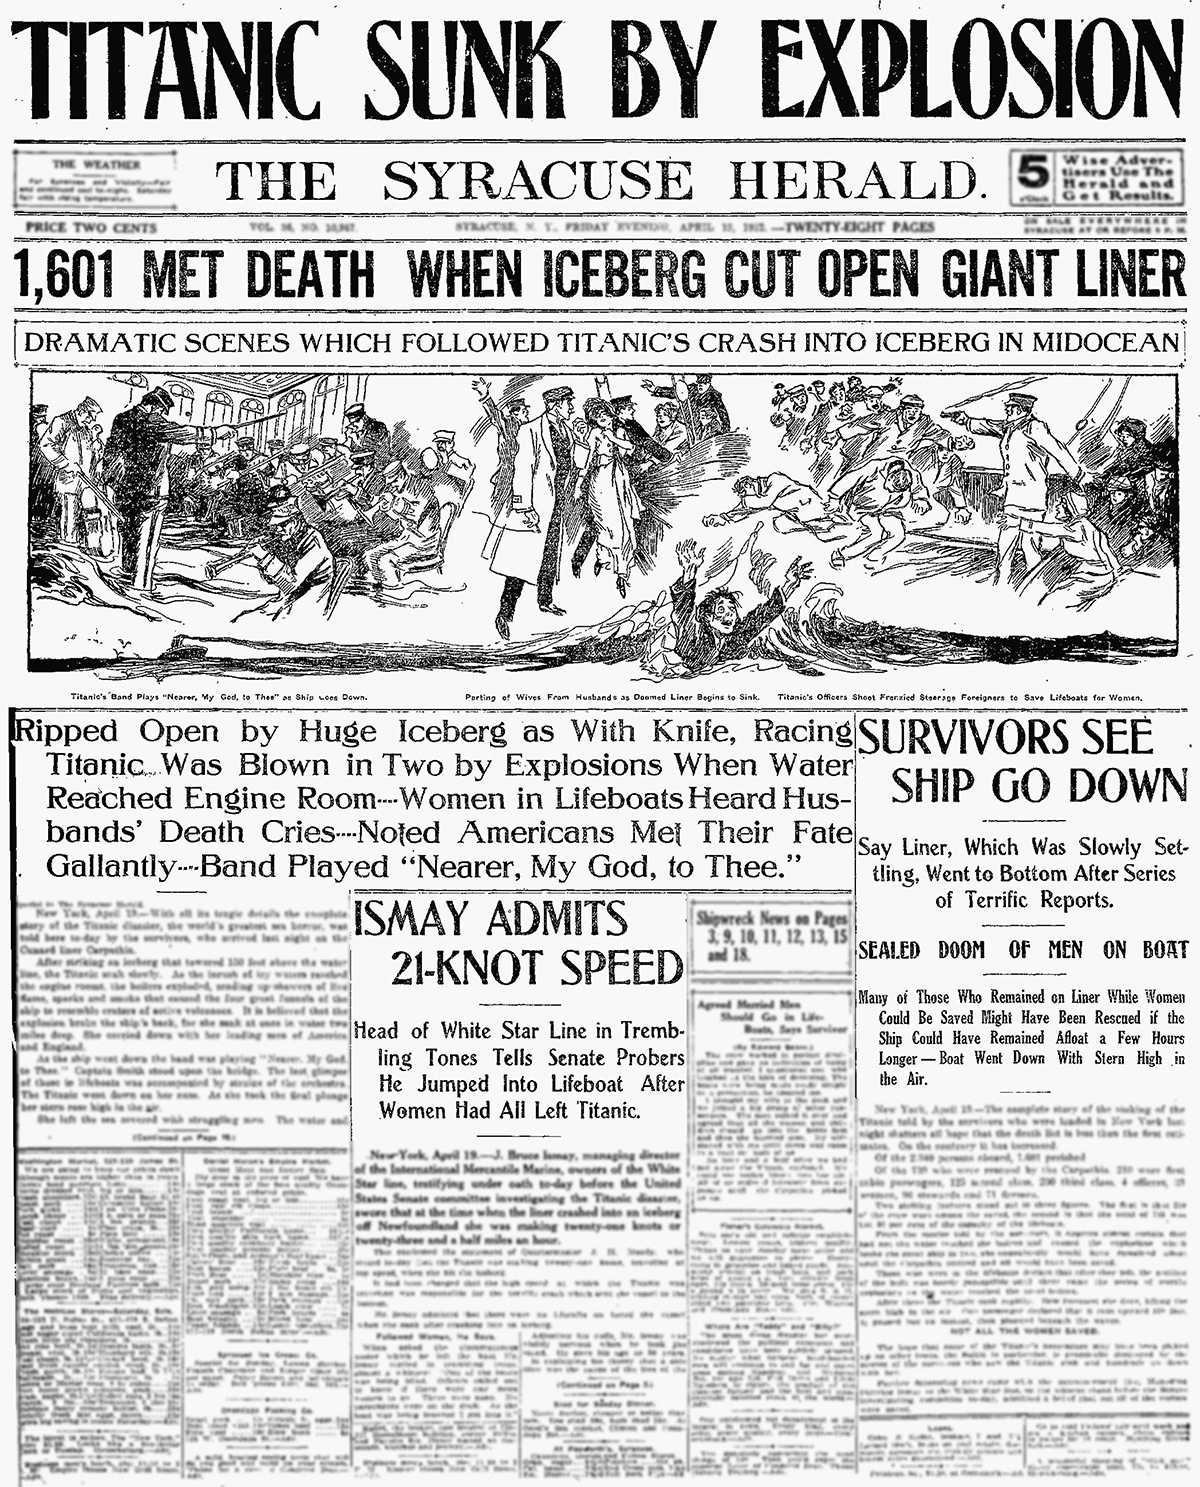 Titanic In Black And White Headlines Both Informative And Inaccurate Reporting